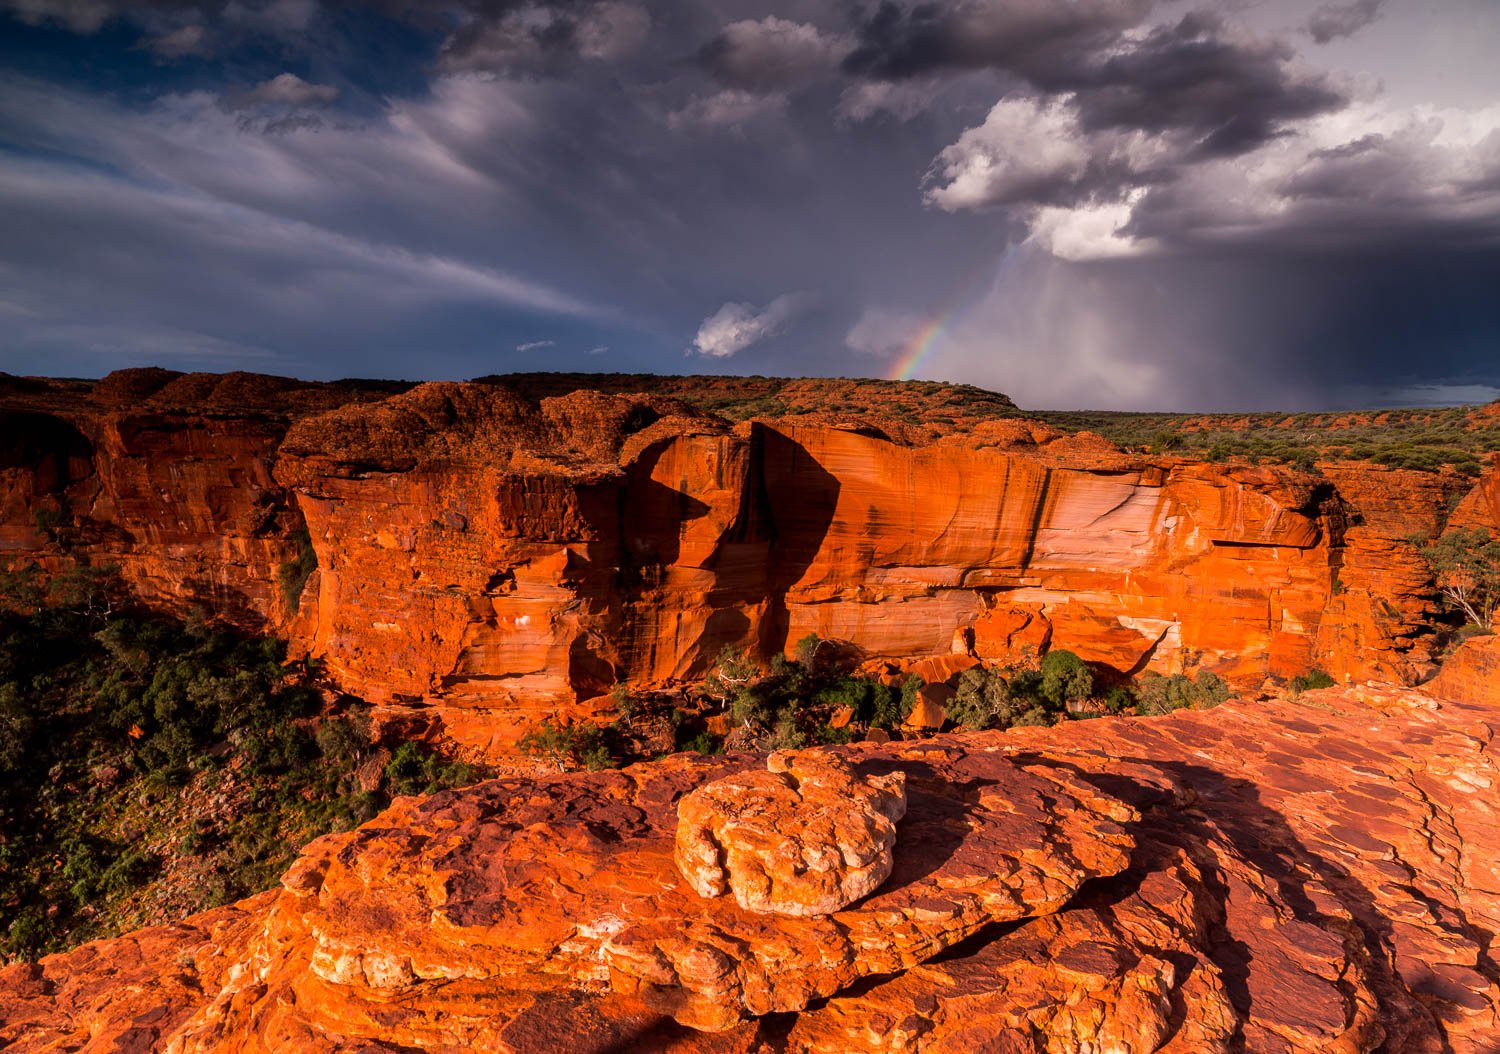 High Orange mountain wall with dark clouds beside, Storm over Kings Canyon #2 - Northern Territory